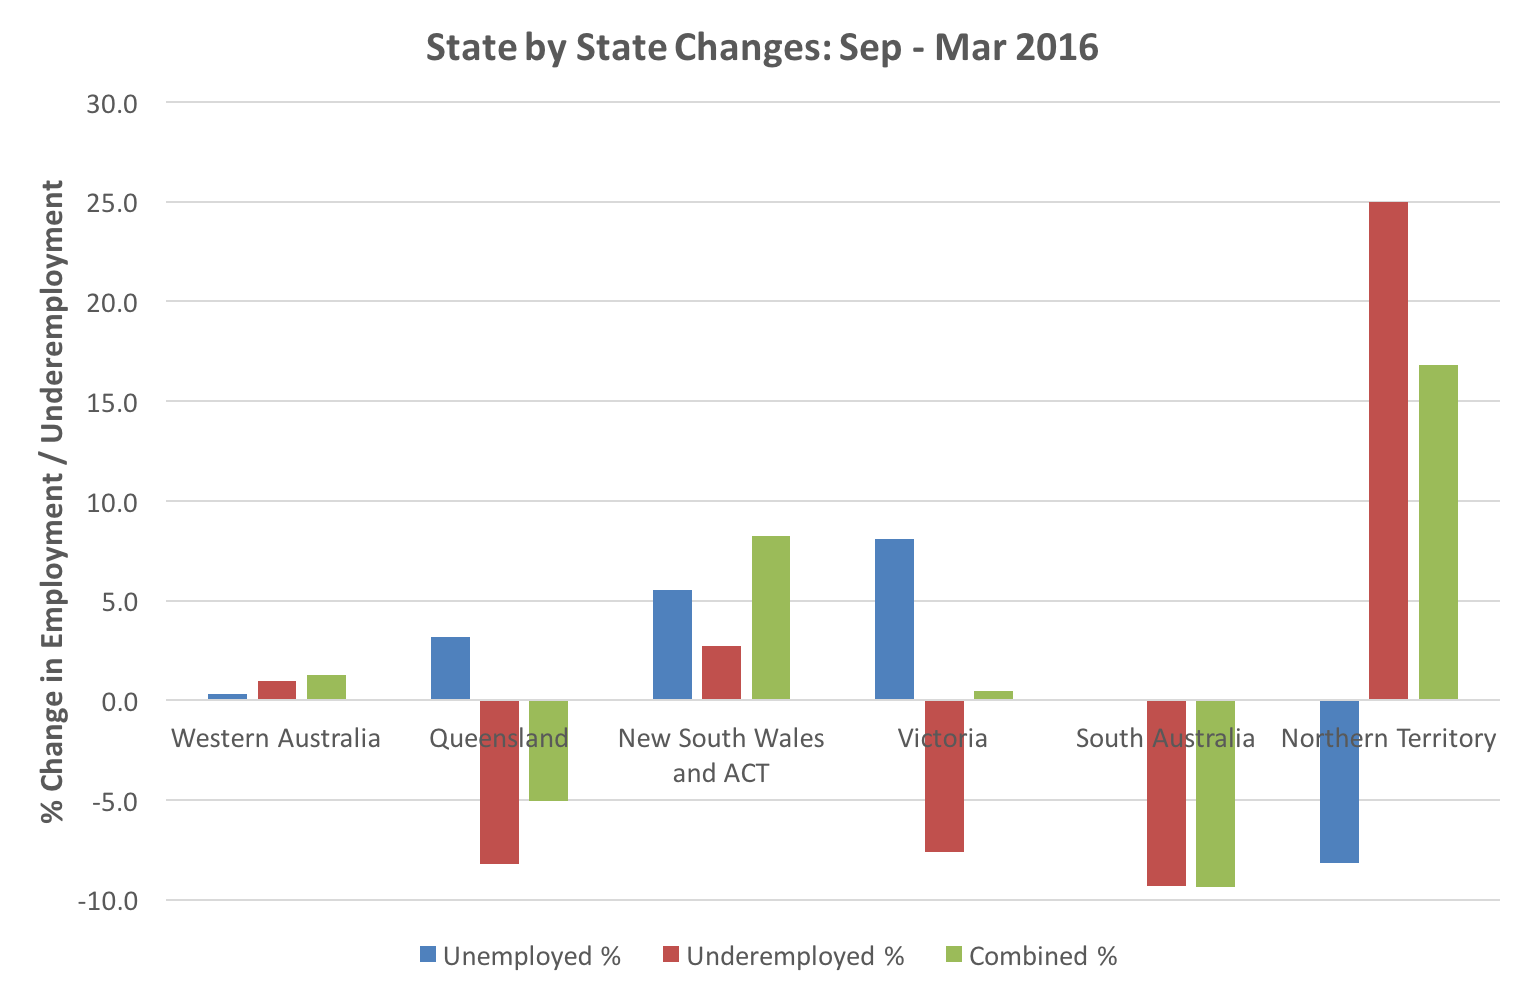 Figure 3. Changes in state unemployment and underemployment during Q1 2016 